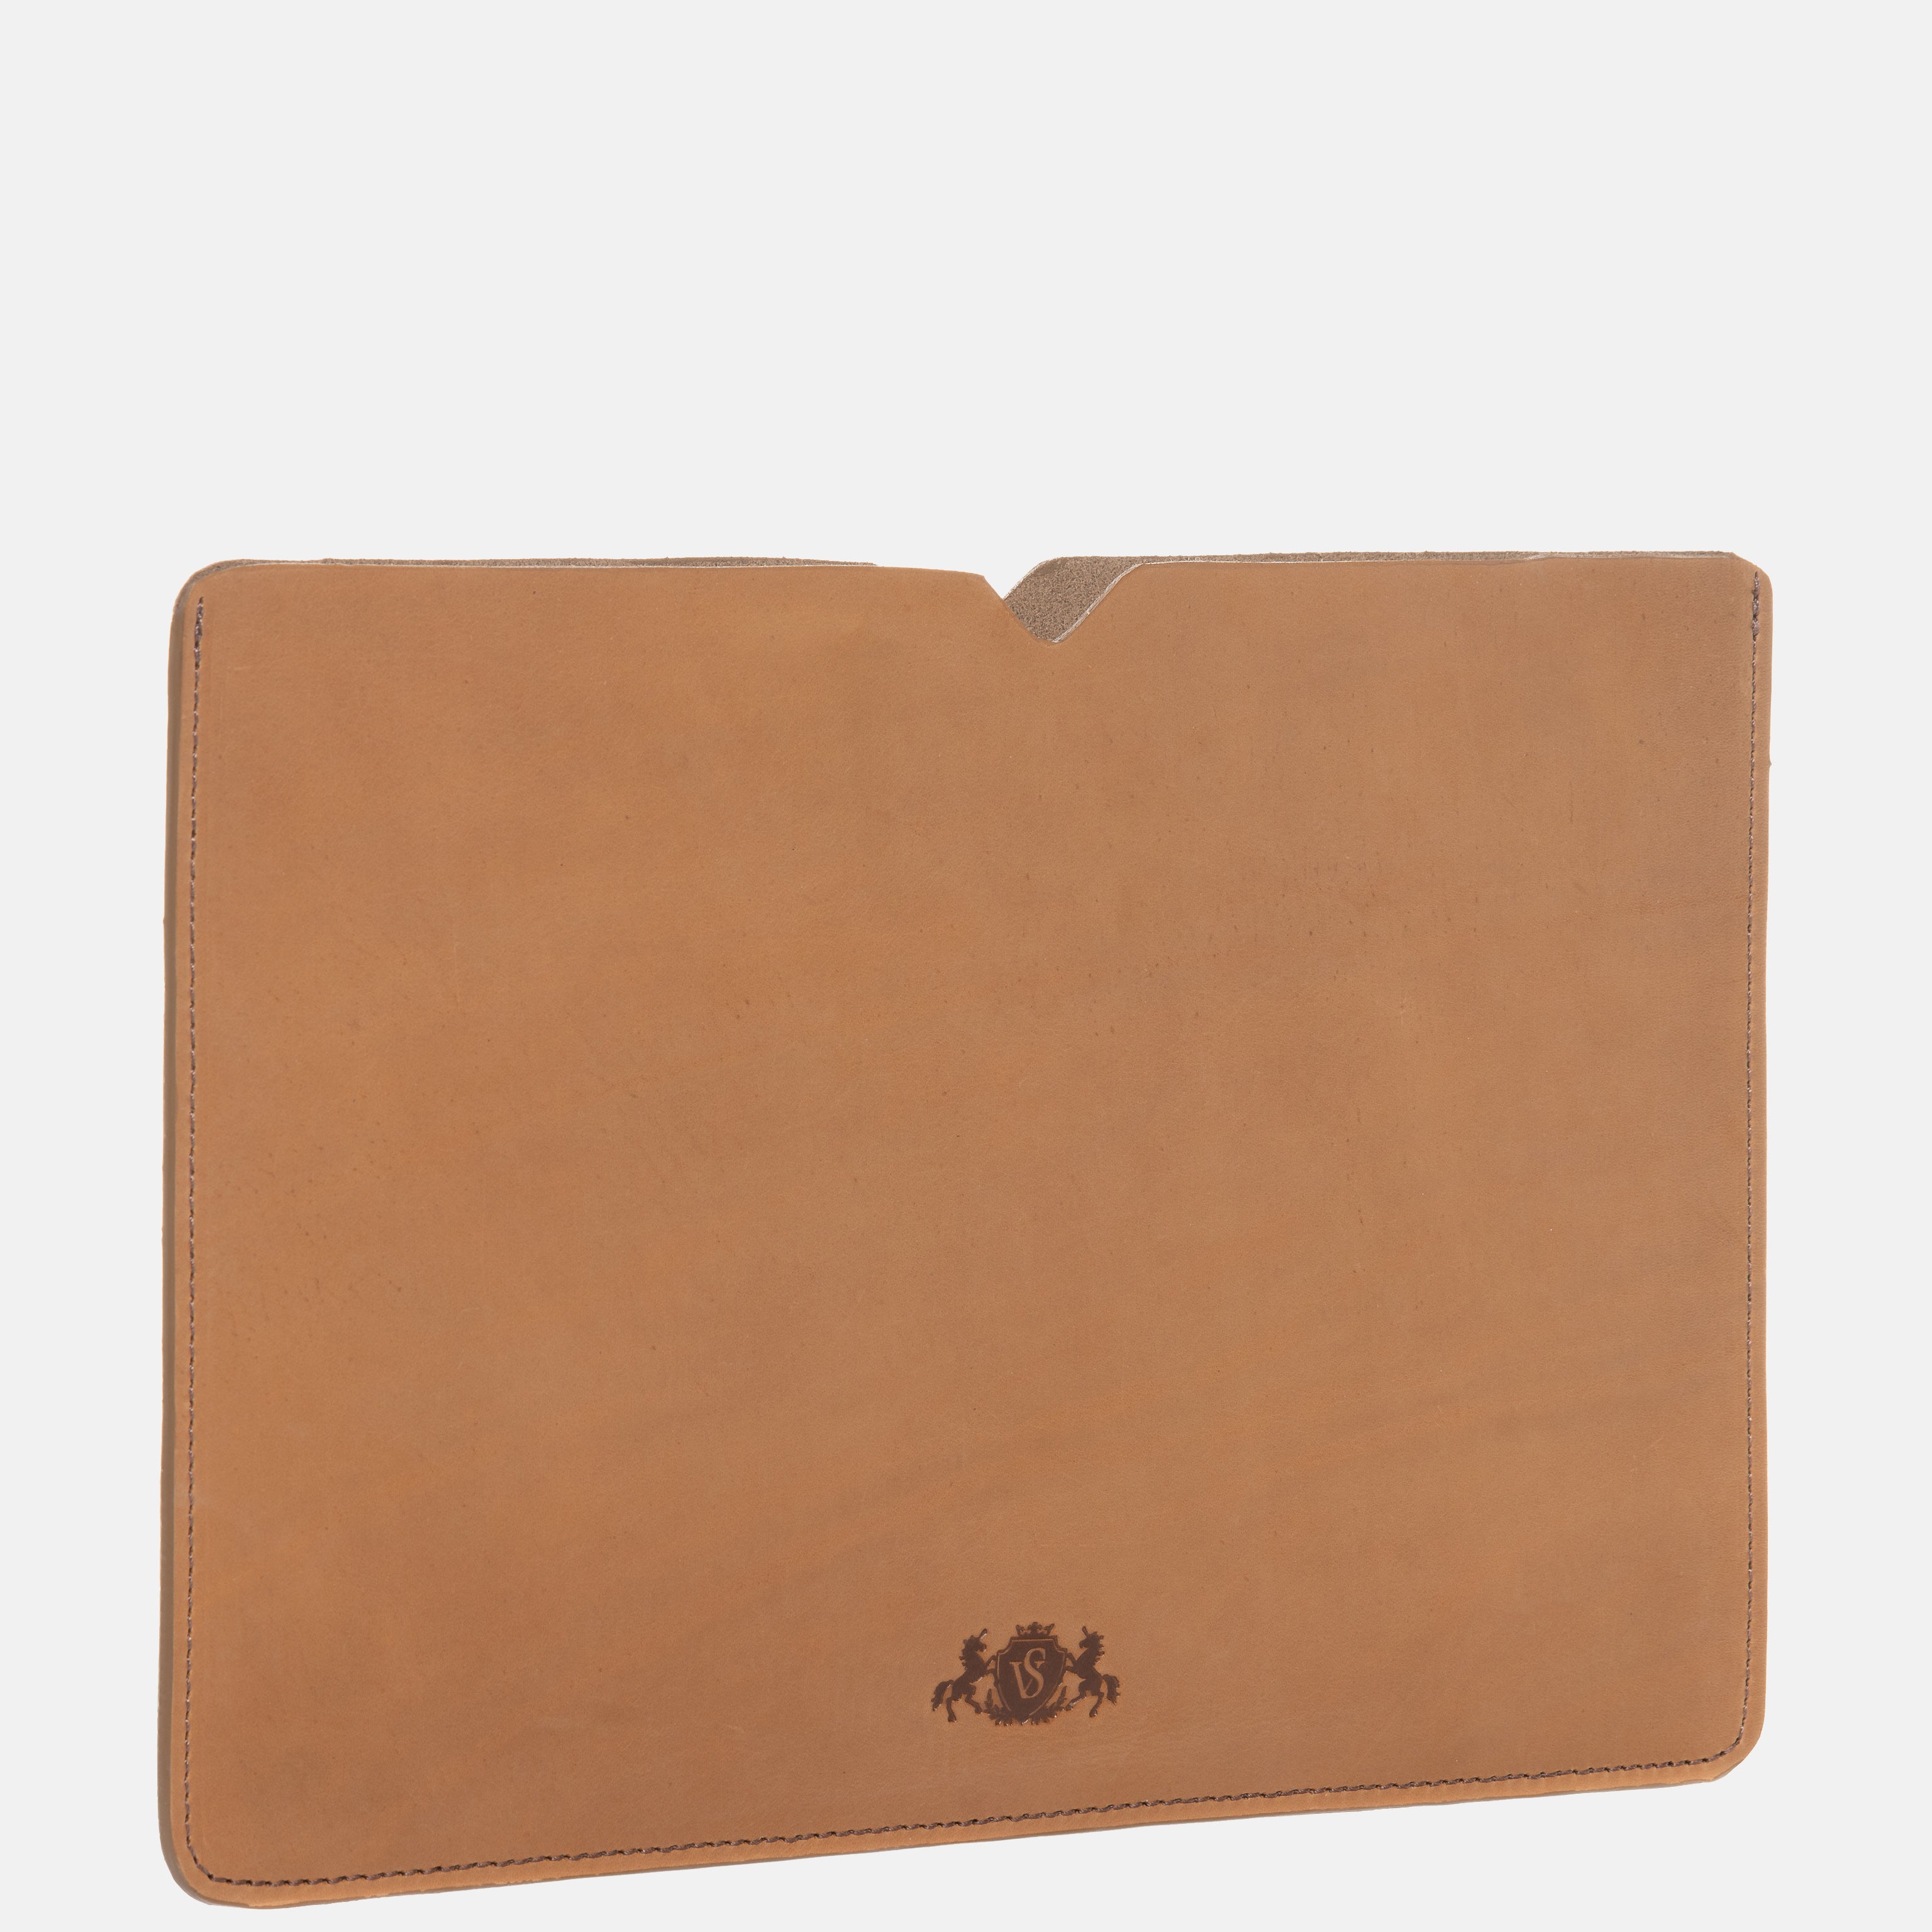 Laptop sleeve RORY smooth leather brown